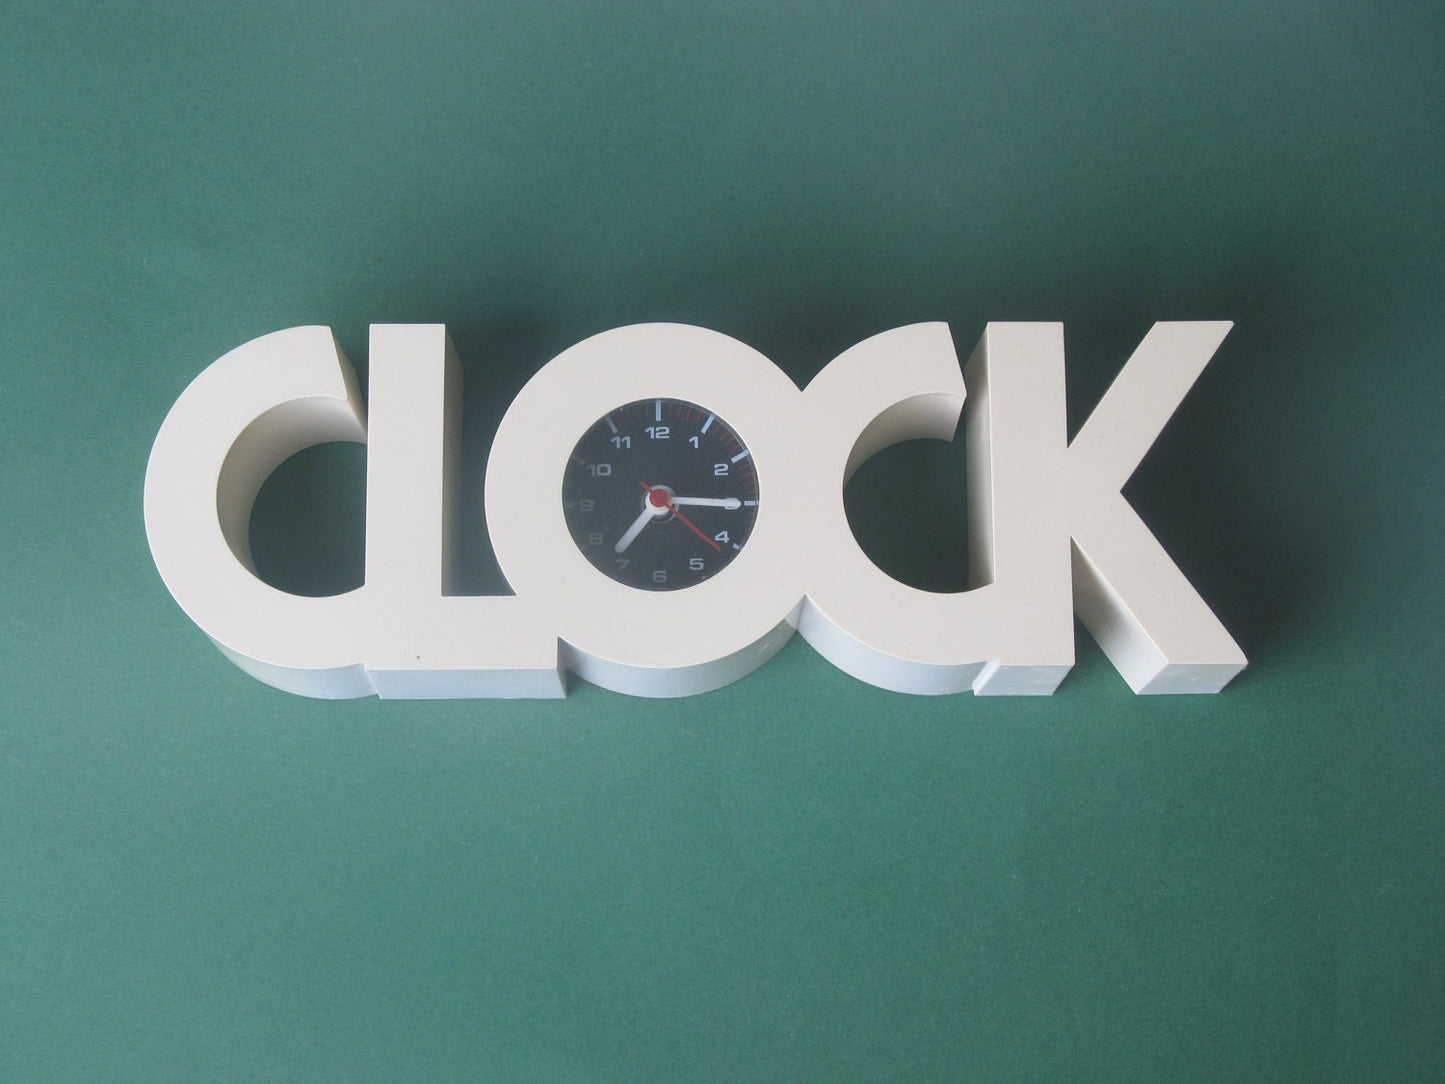 typical 70's / Seventies Clock